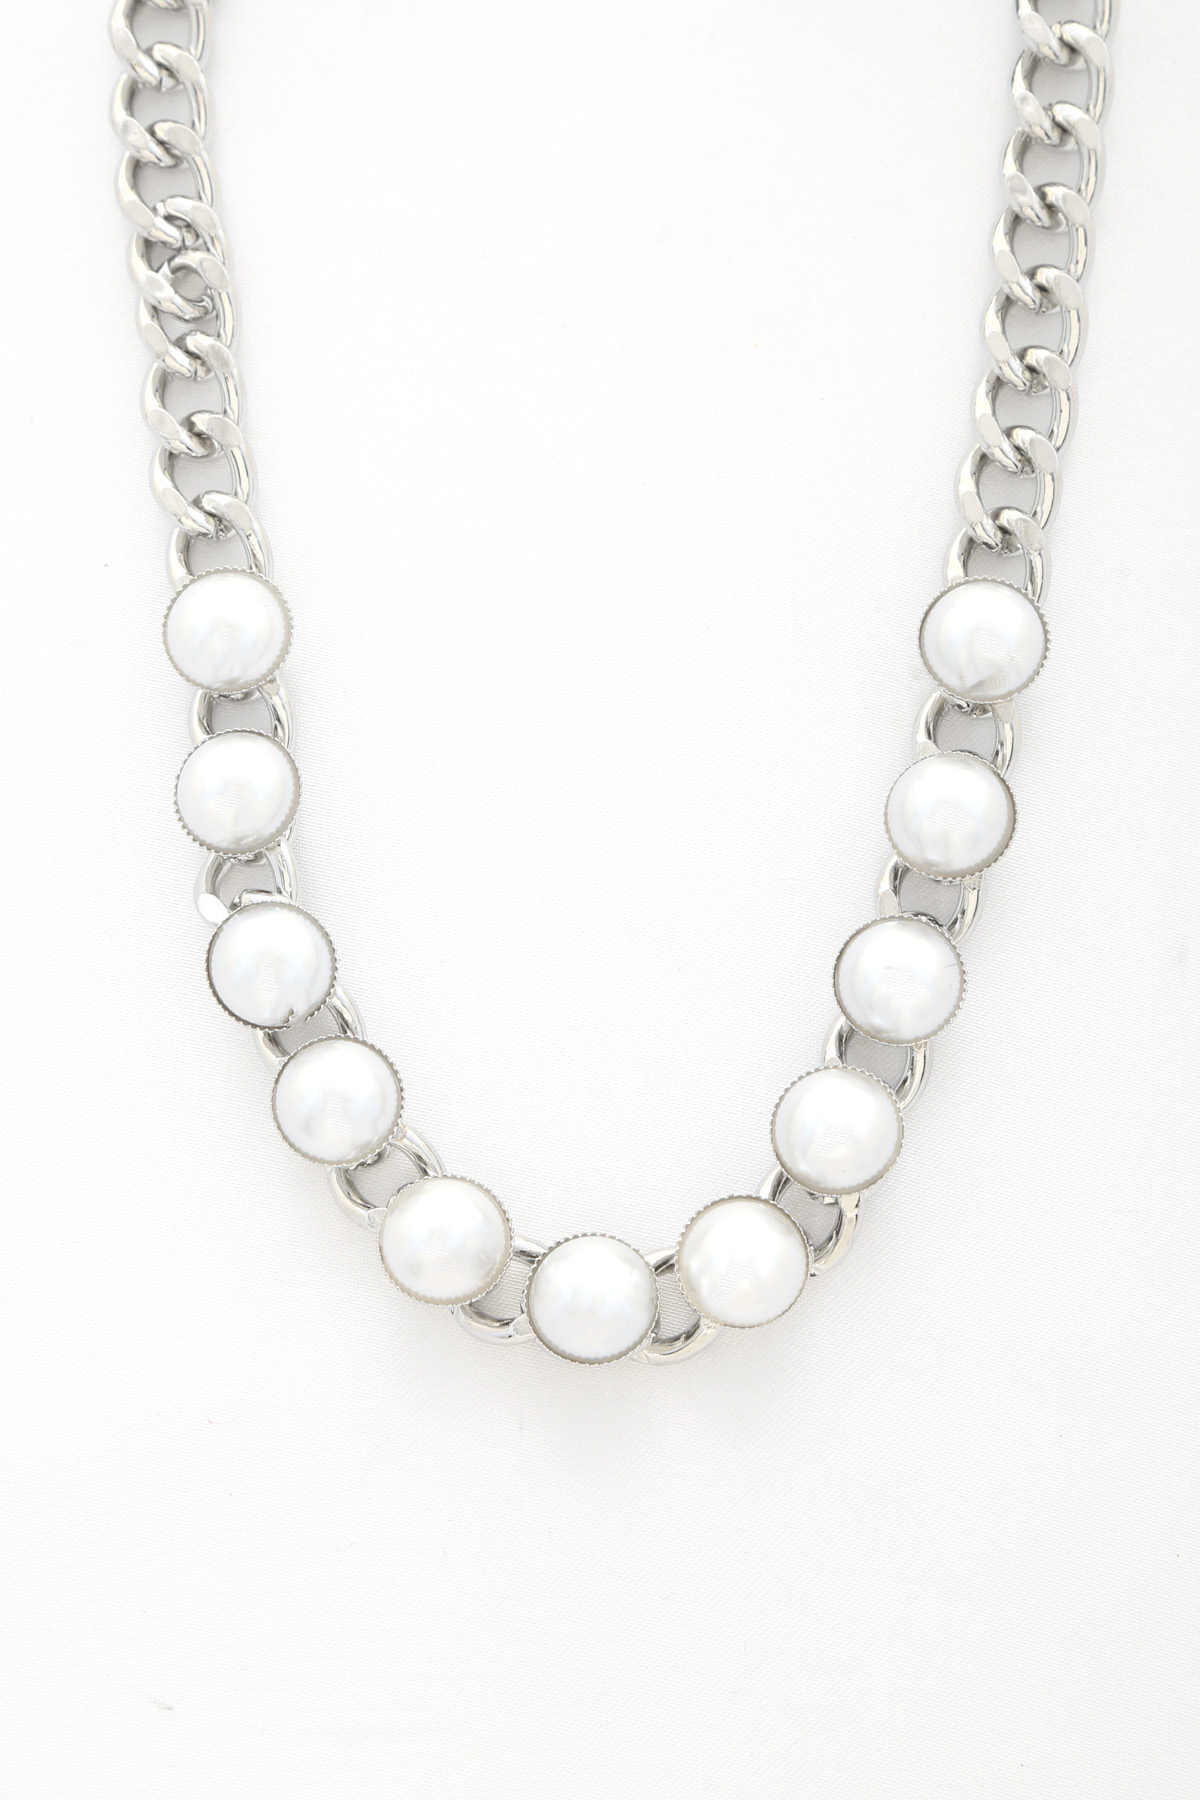 PEARL BEAD CURB LINK NECKLACE